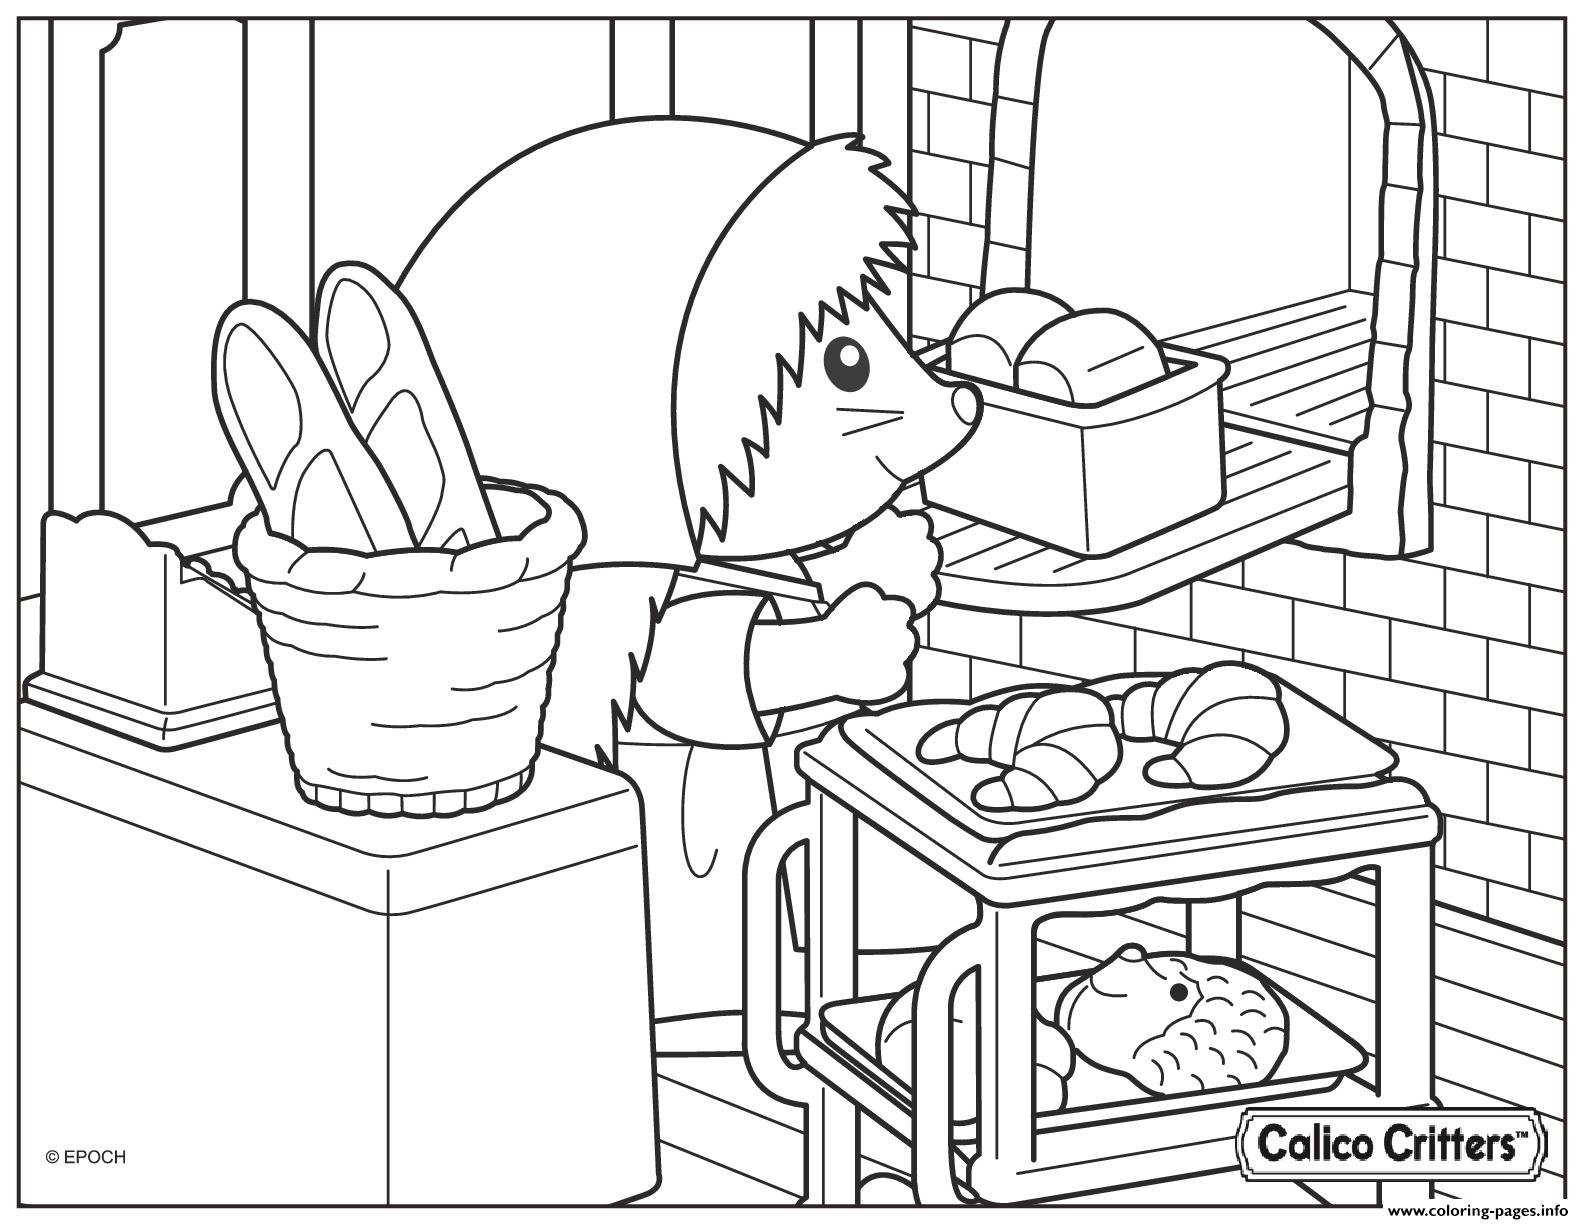 Calico Critters Cooking Croissant Bread Coloring Pages Printable